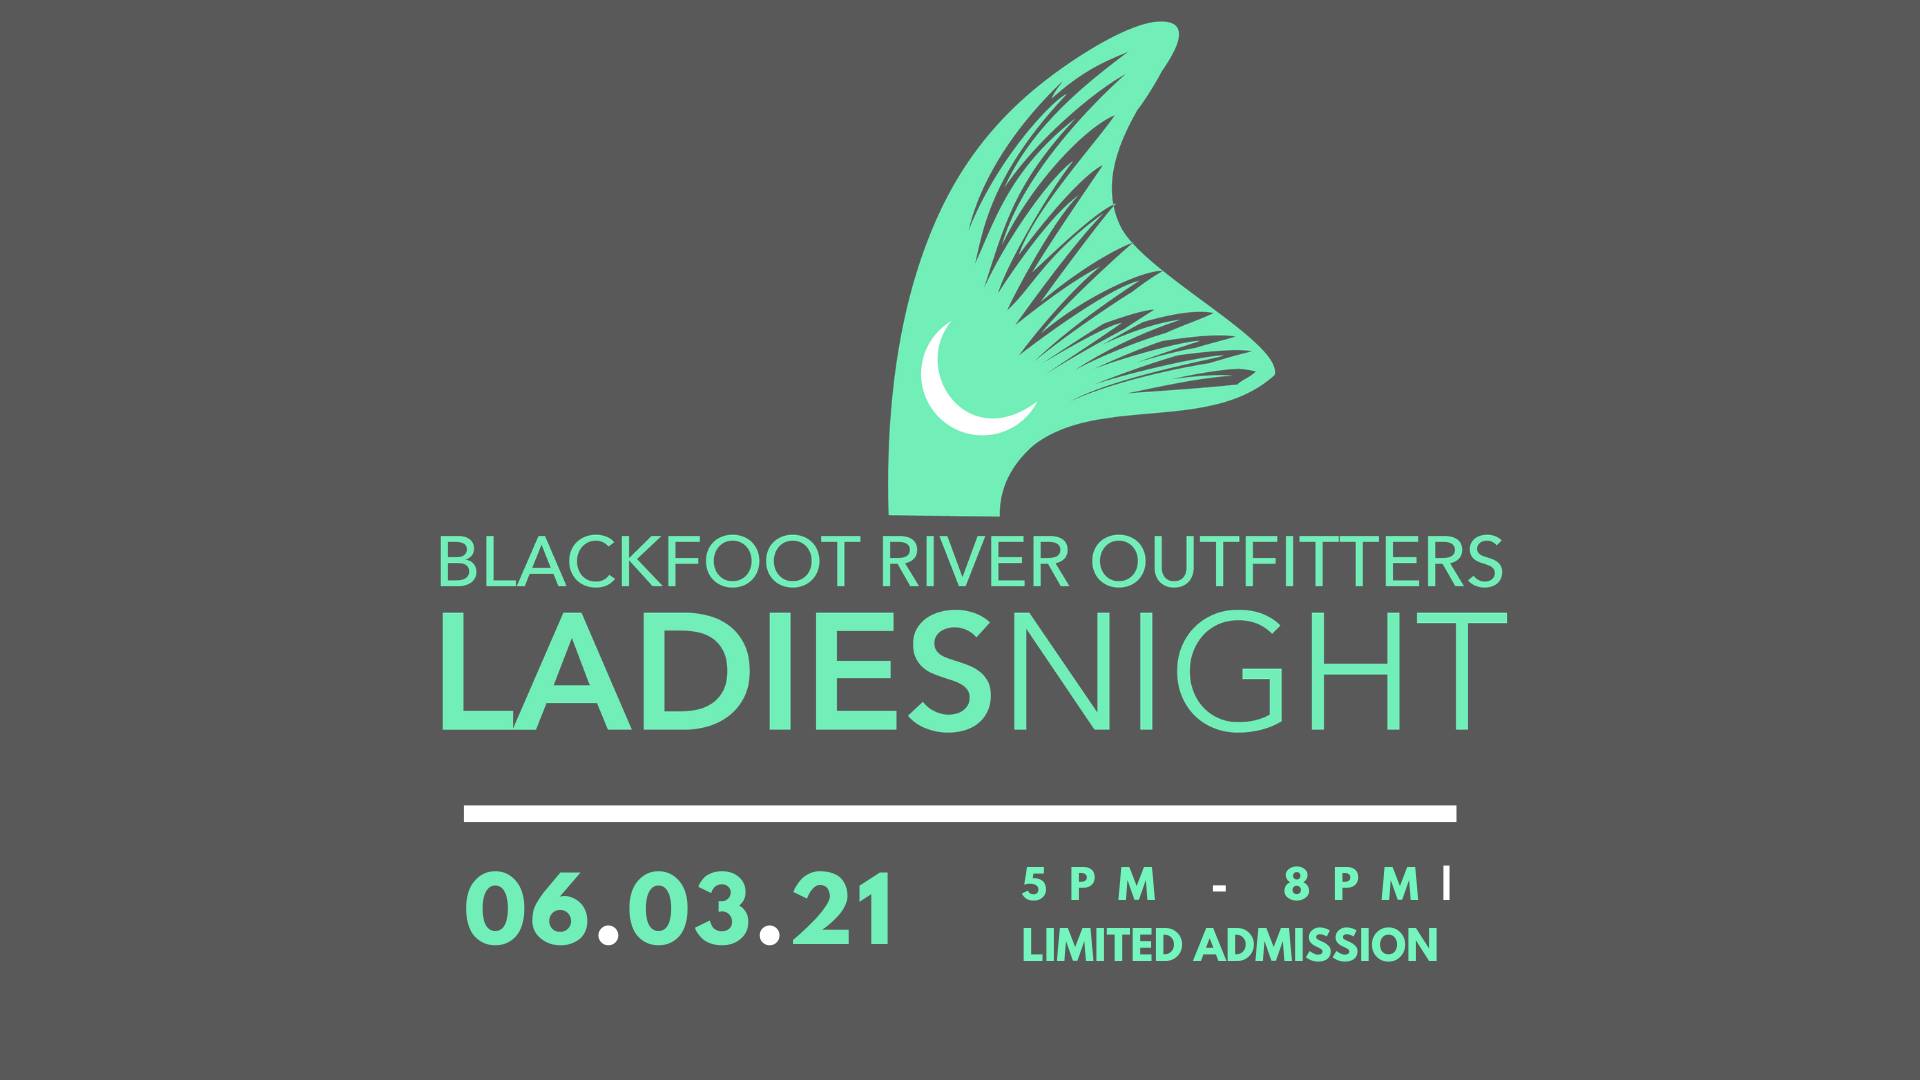 Blackfoot River Outfitters Ladies Night